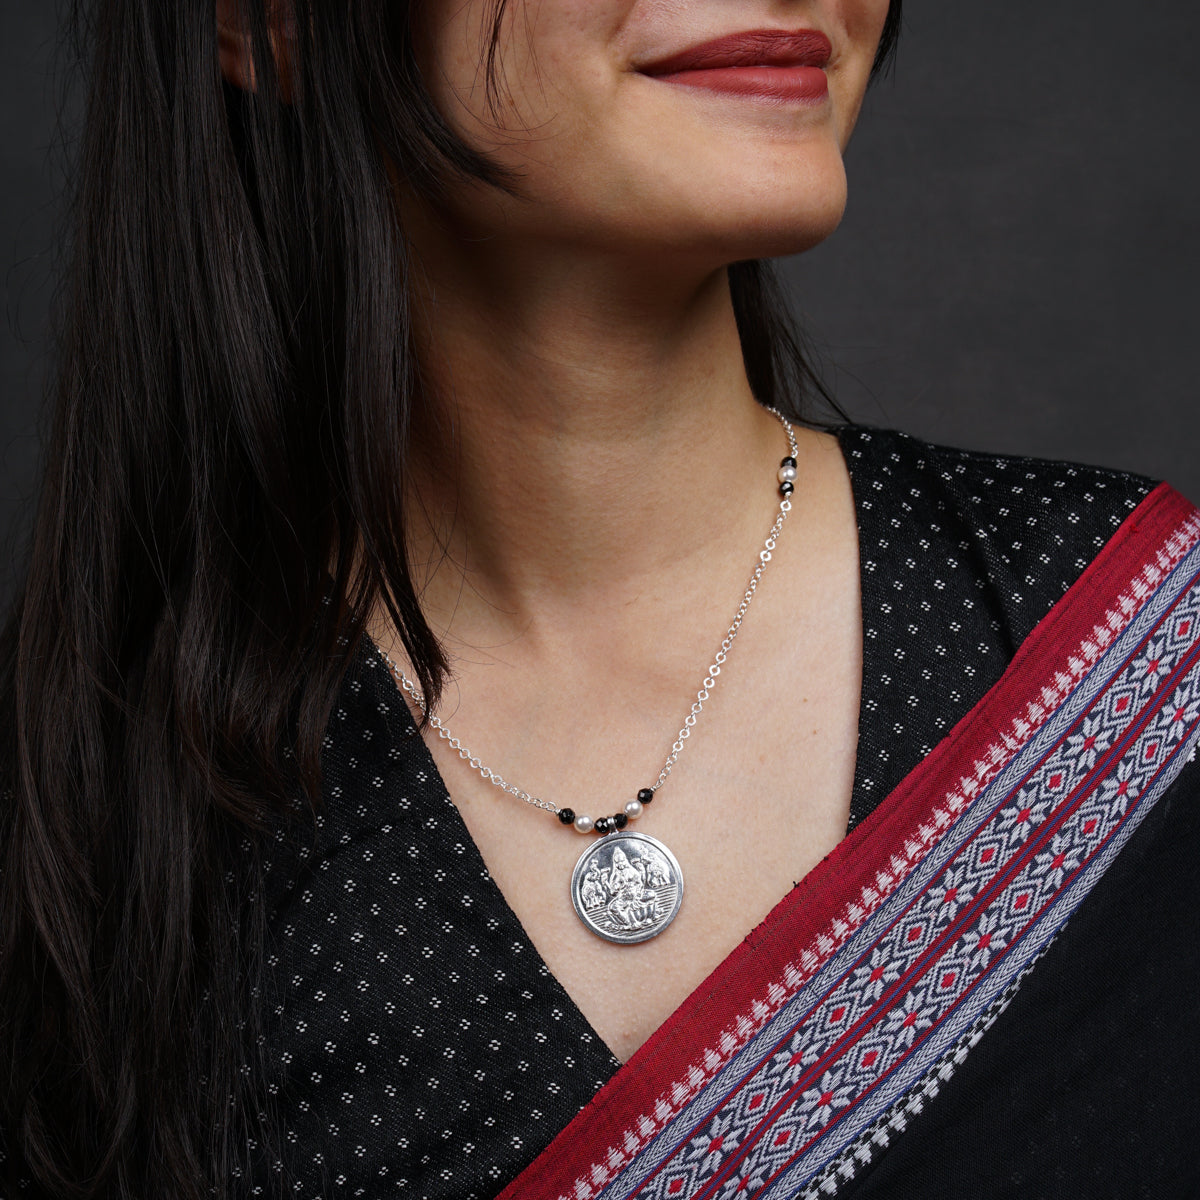 a woman wearing a necklace with a medallion on it